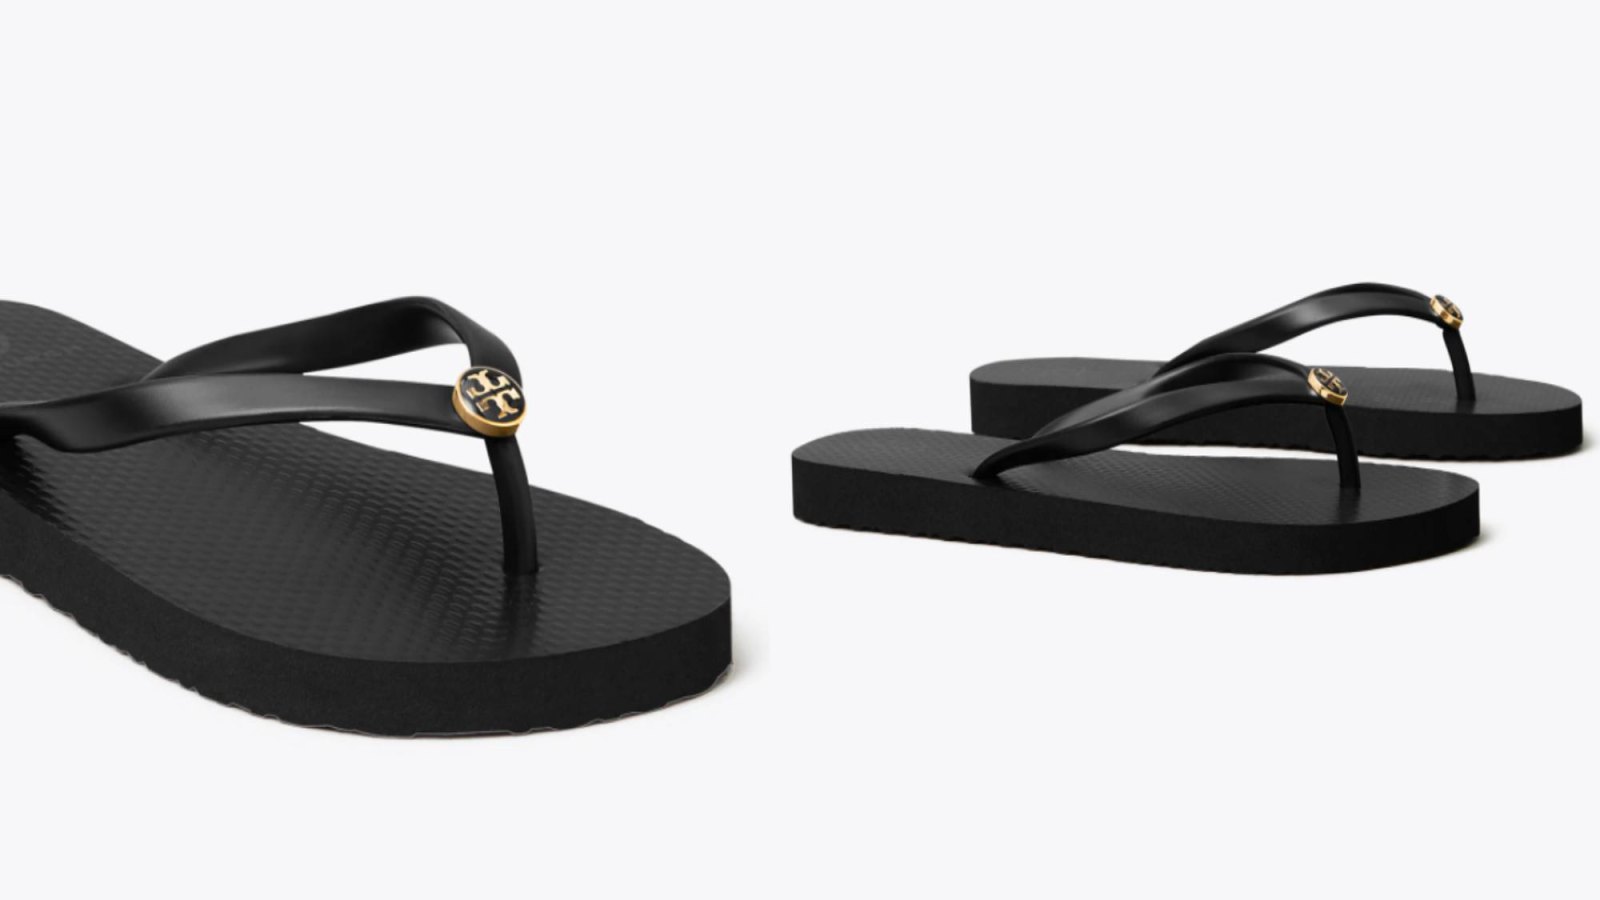 Tory Burch Flip Flops That Will Last You Years Are Only $48 | UsWeekly